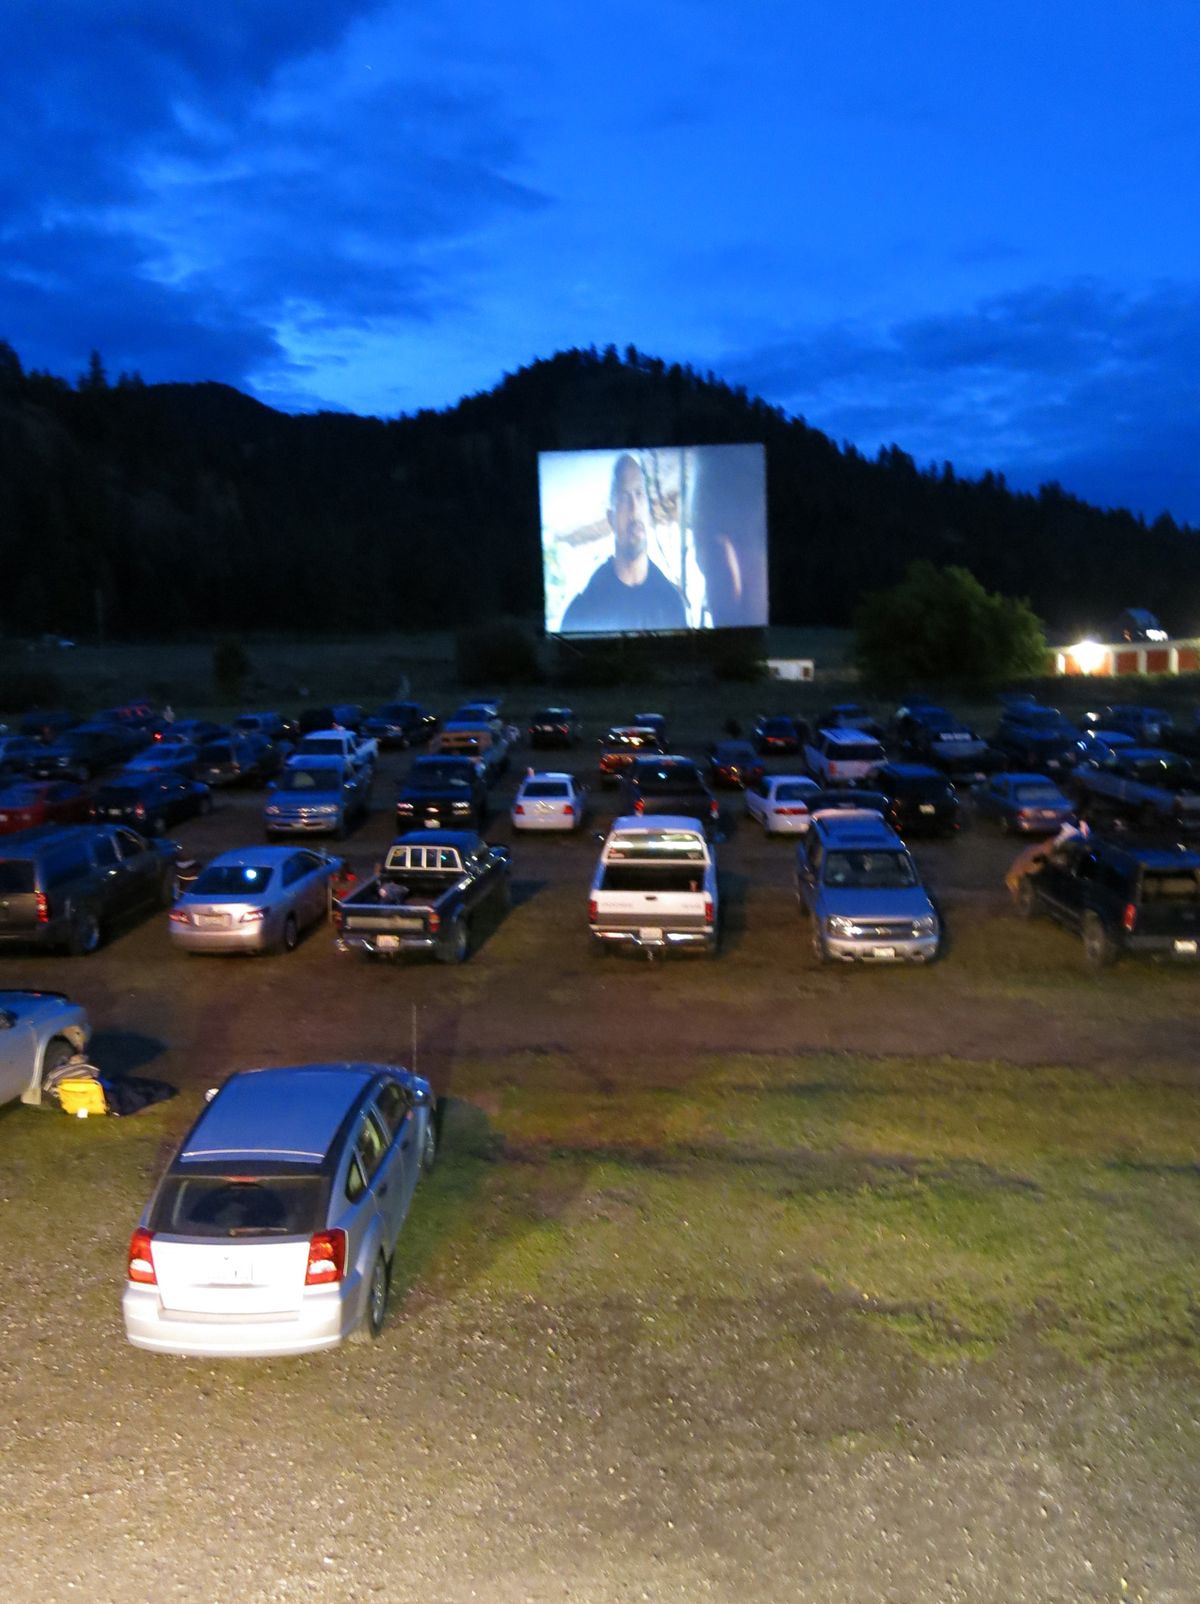 Colville’s Auto Vue Drive-In Theatre, which opened in 1953, is Eastern Washington’s last drive-in. It will close in September for good.